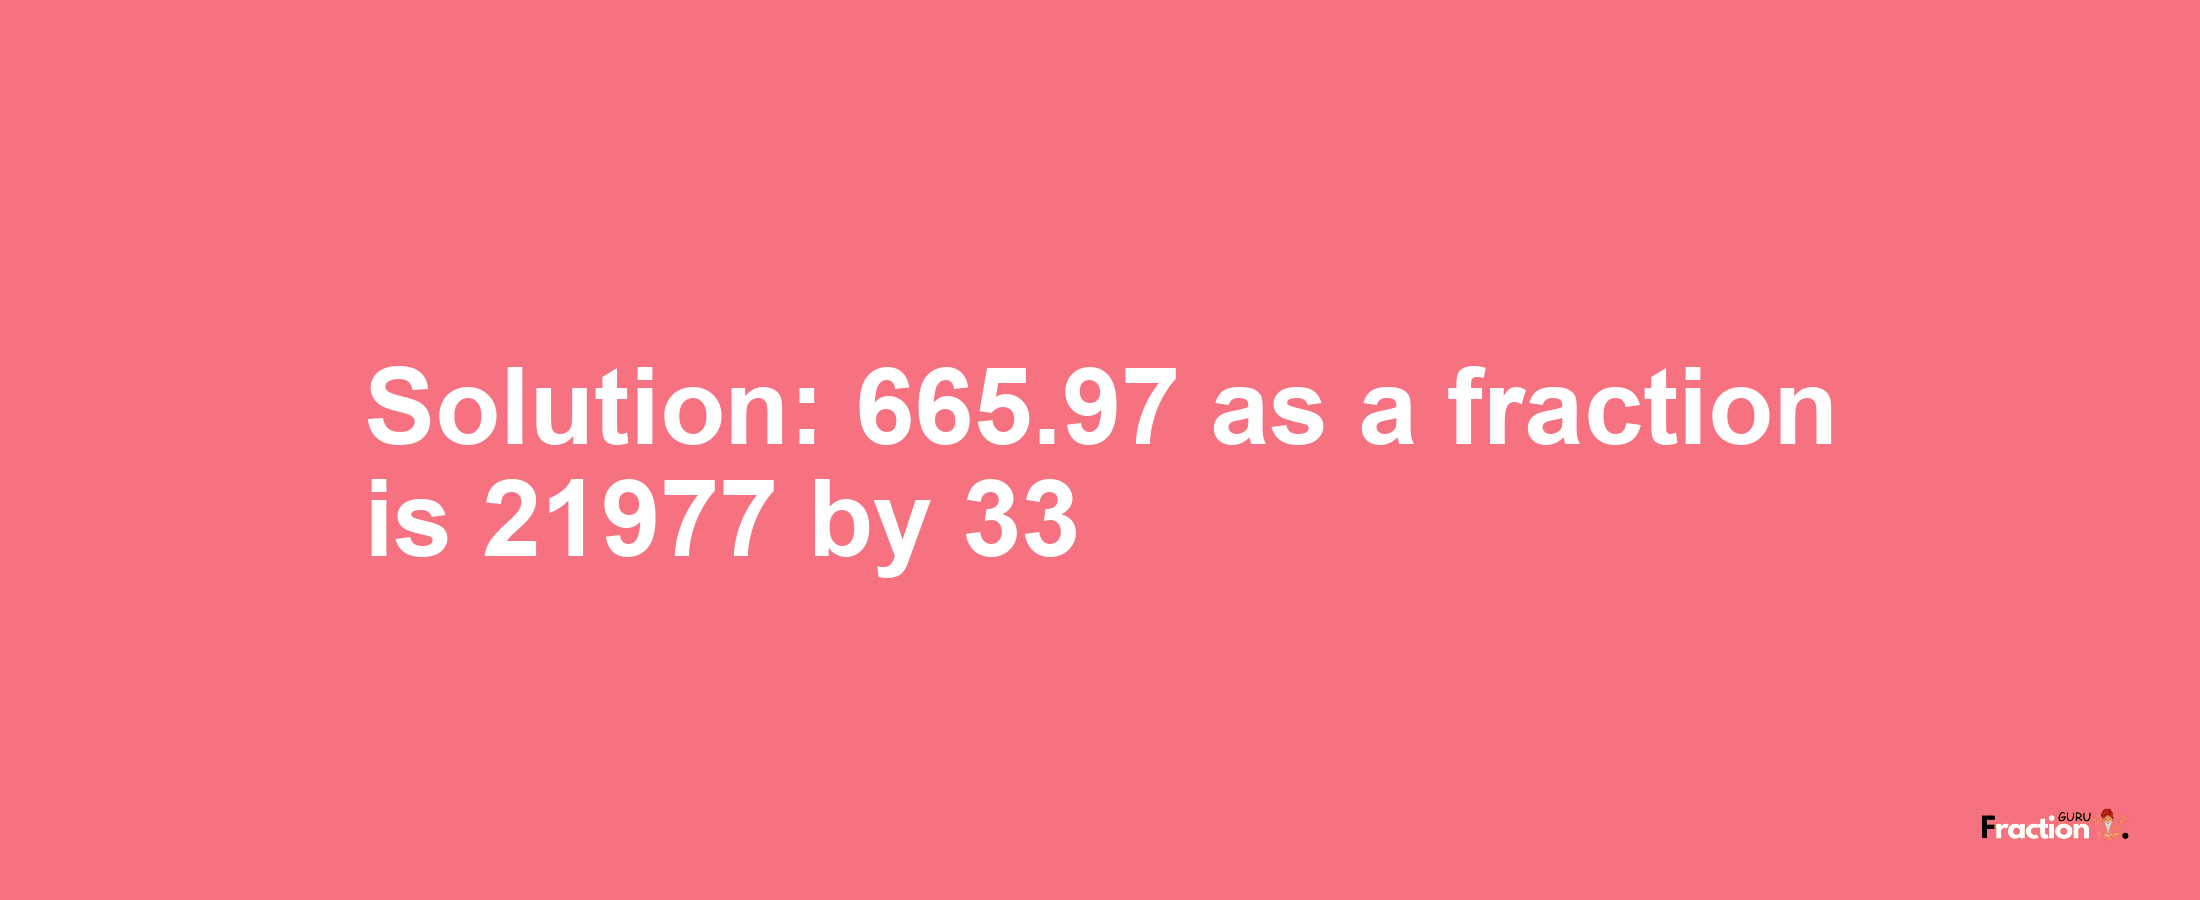 Solution:665.97 as a fraction is 21977/33